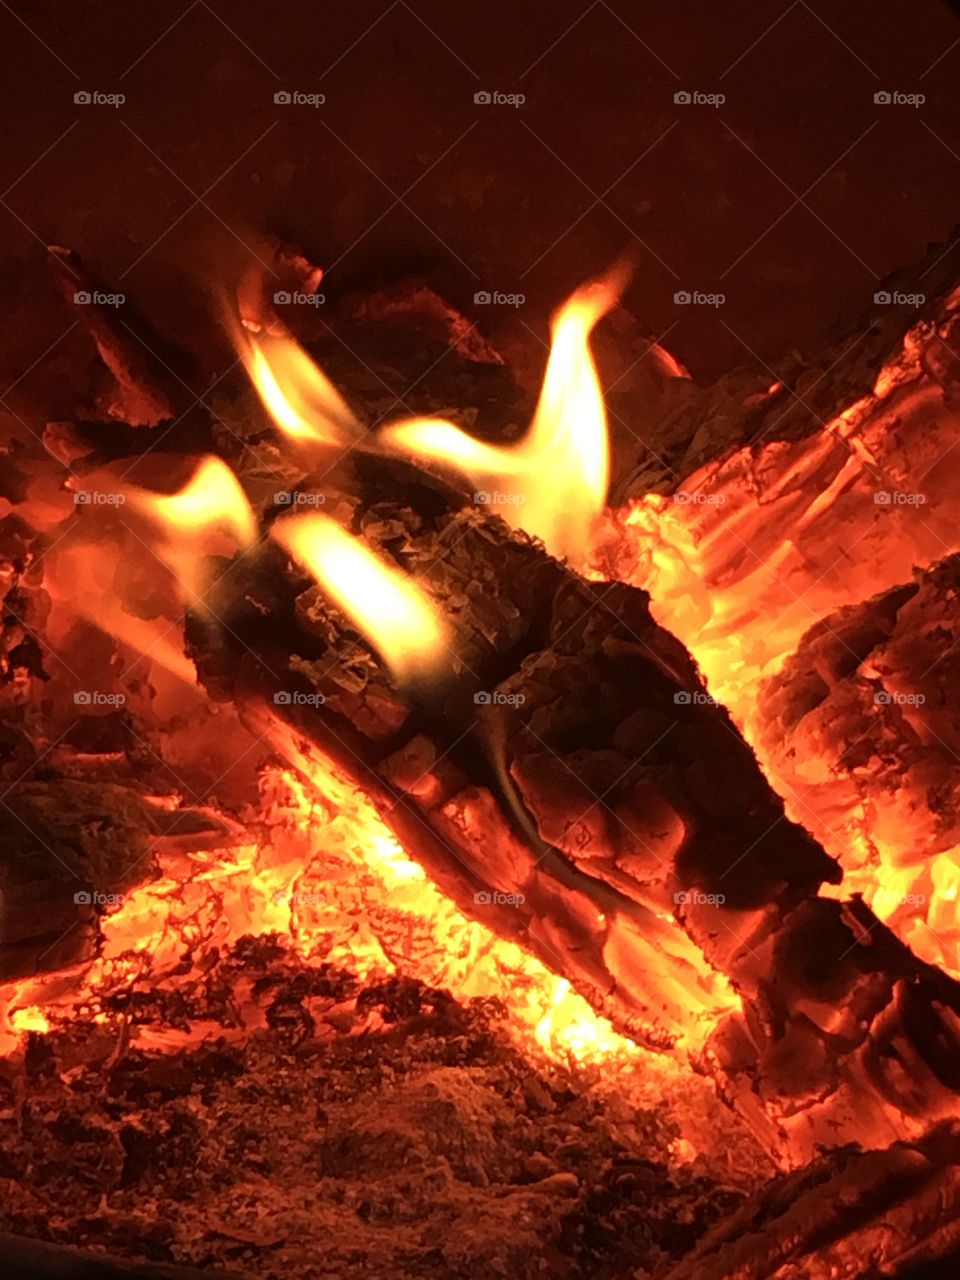 Pile of wooden logs burning with flames in a chiminea in the garden